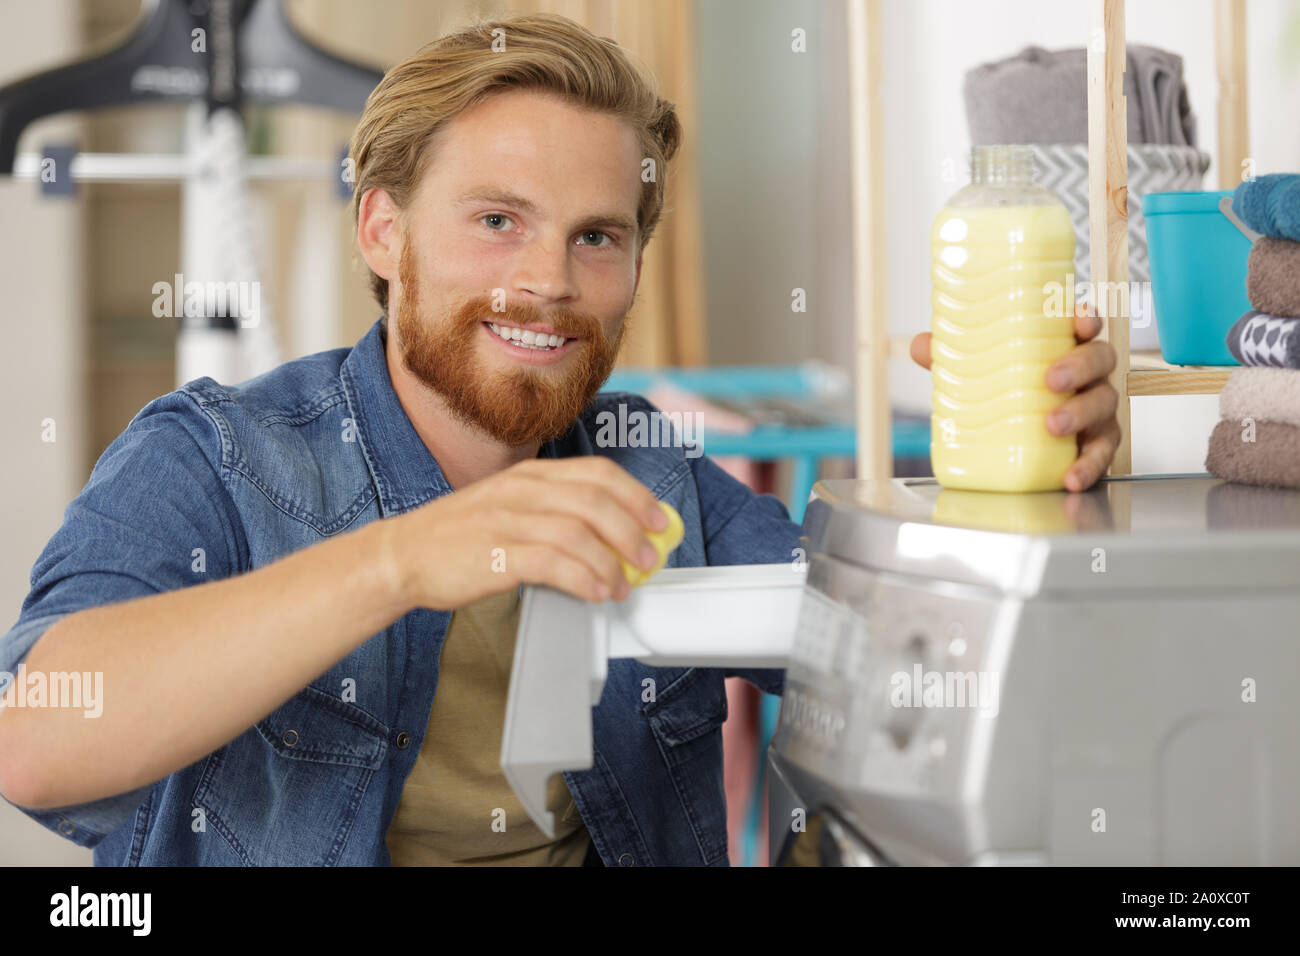 positive young man alone washing cloths Stock Photo